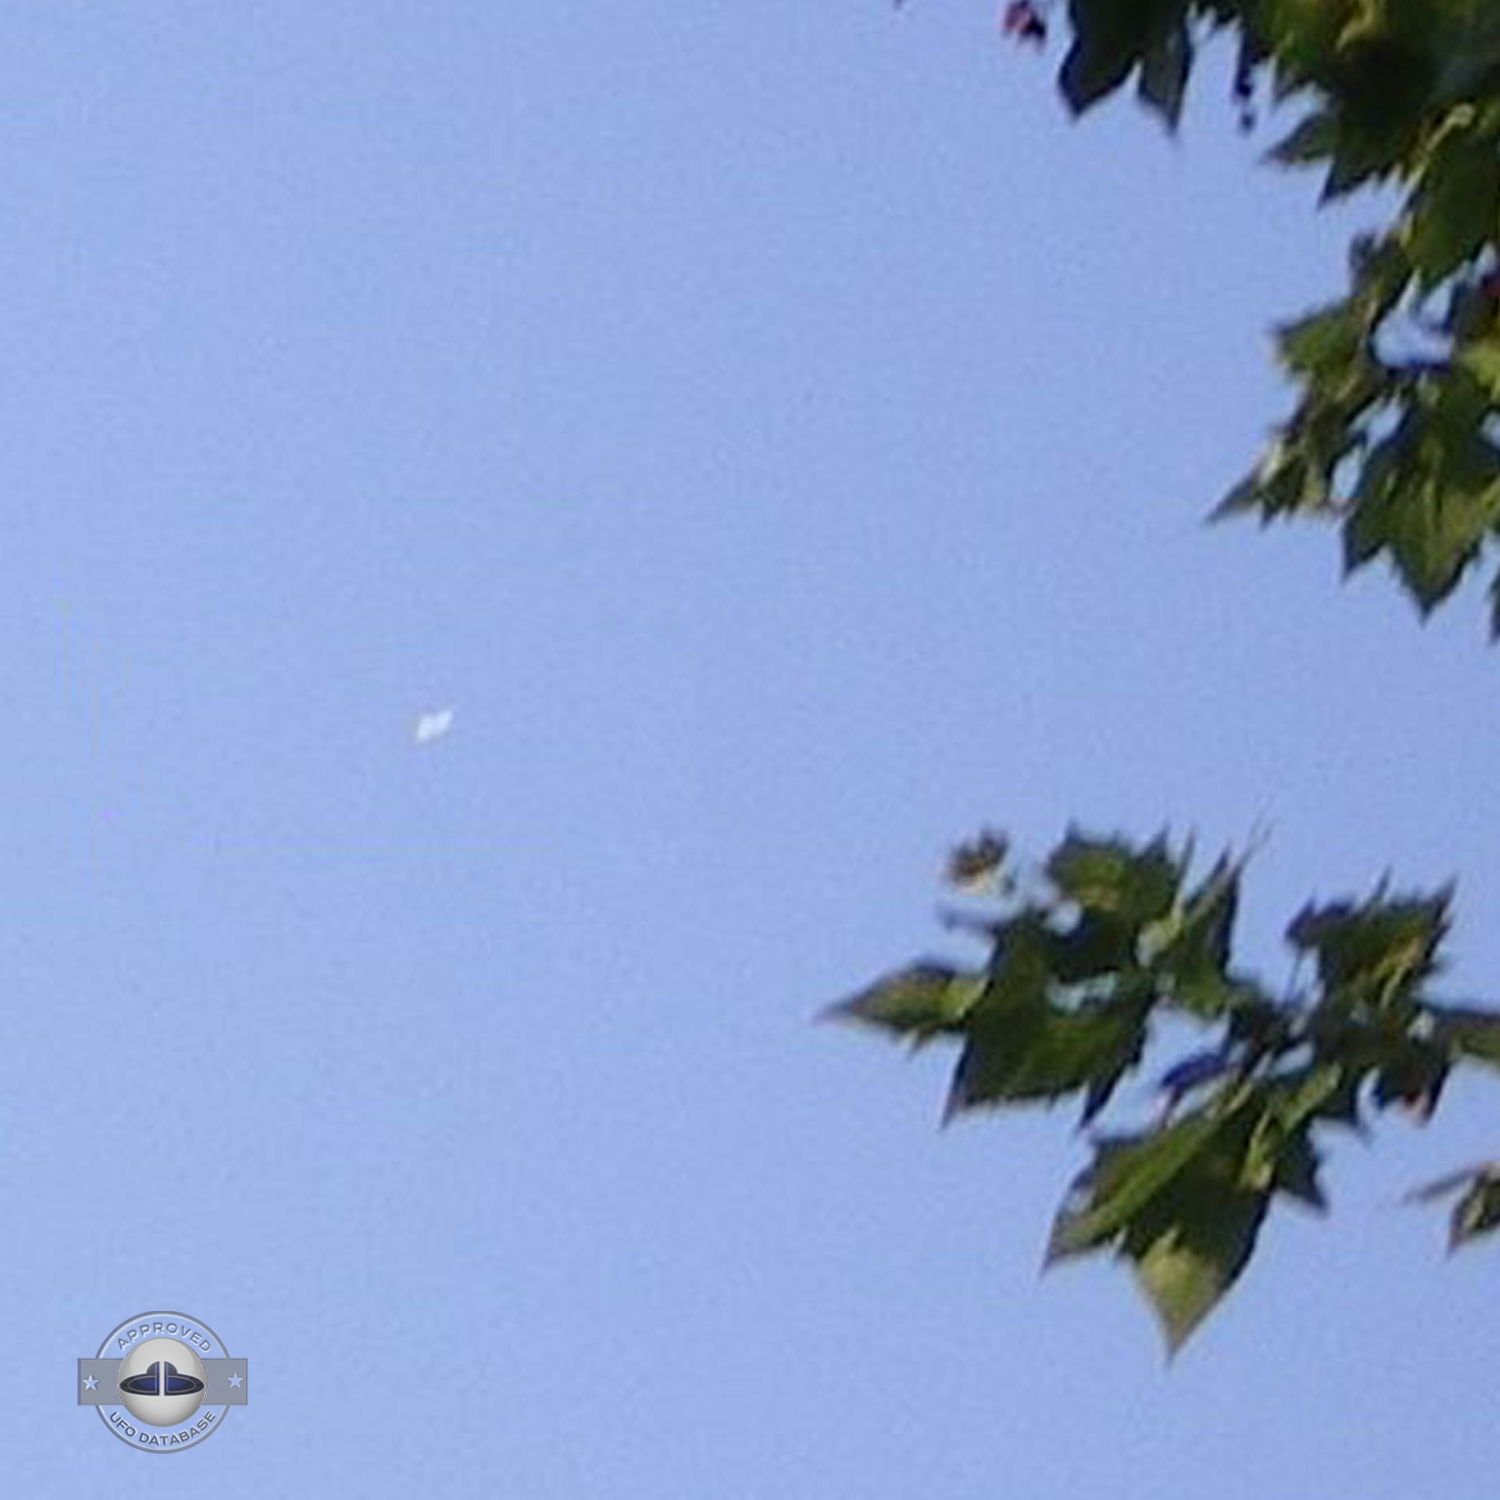 UFO in a blue sky near the pont des demoiselles in Toulouse UFO Picture #11-2